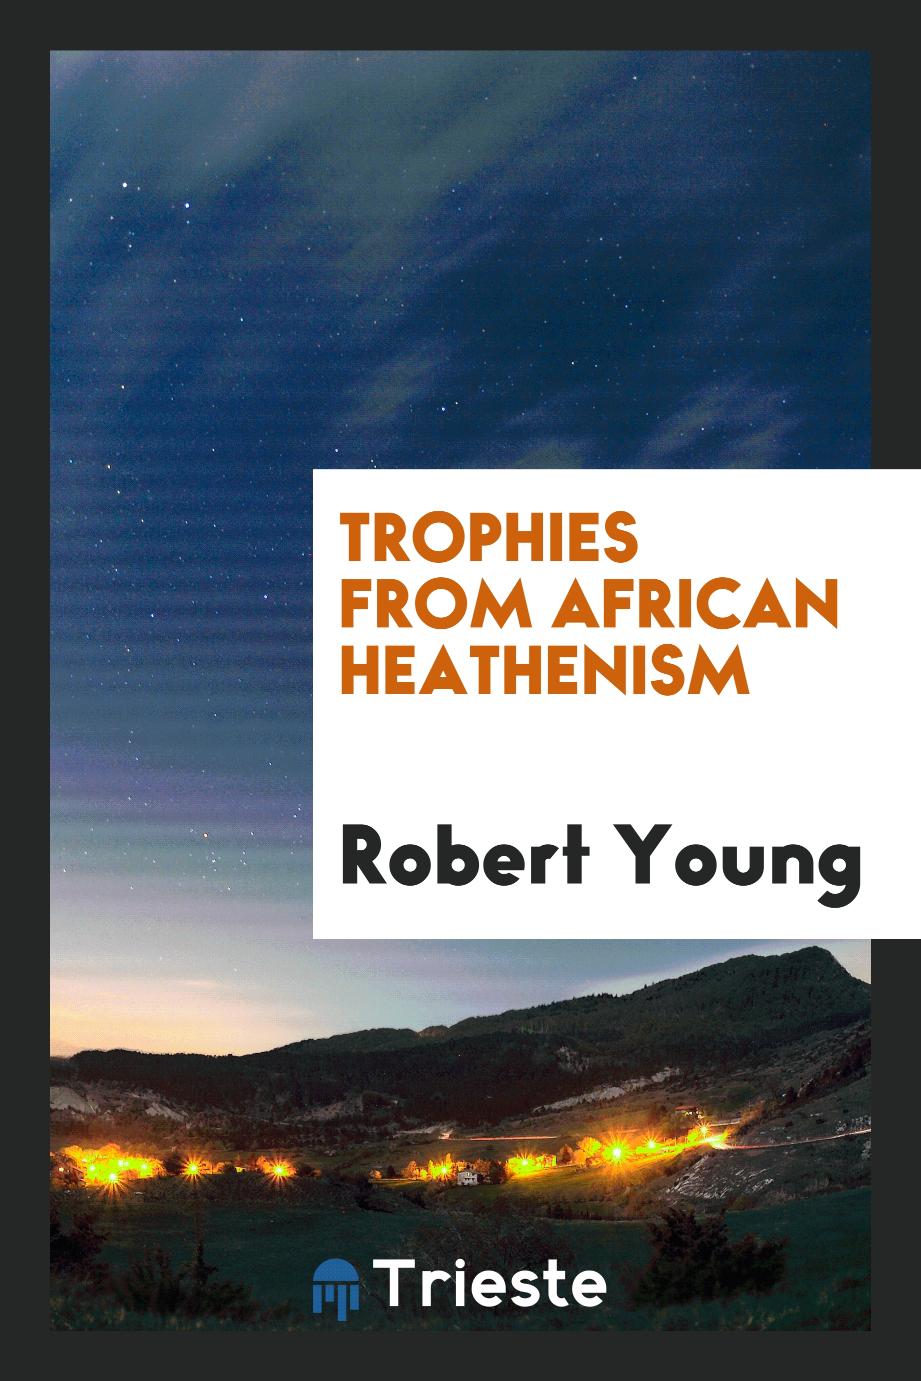 Trophies from African heathenism